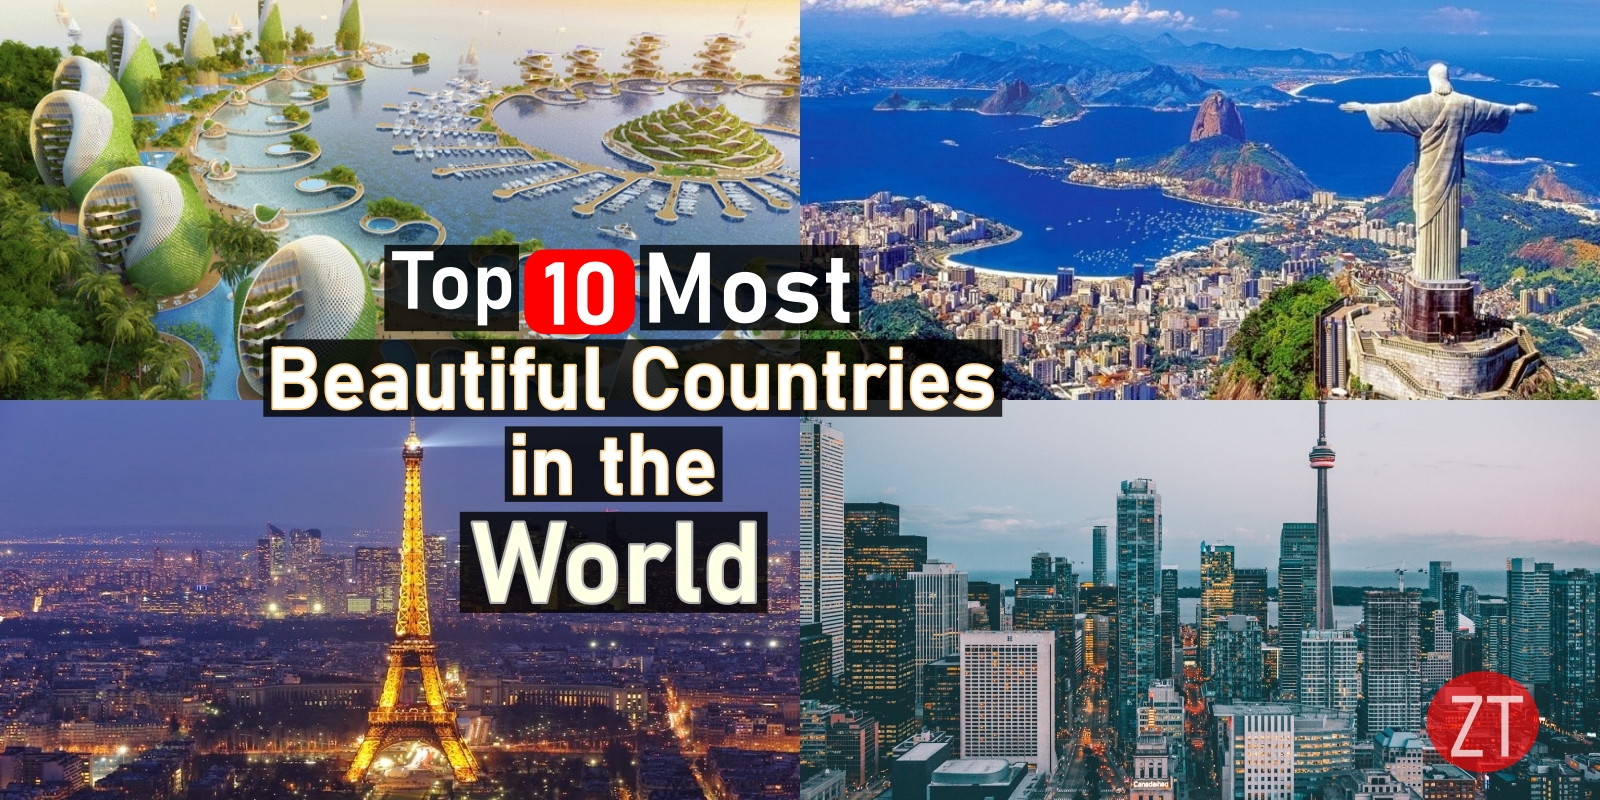 Top 10 Most Beautiful Countries in the World Step Guide to Travel